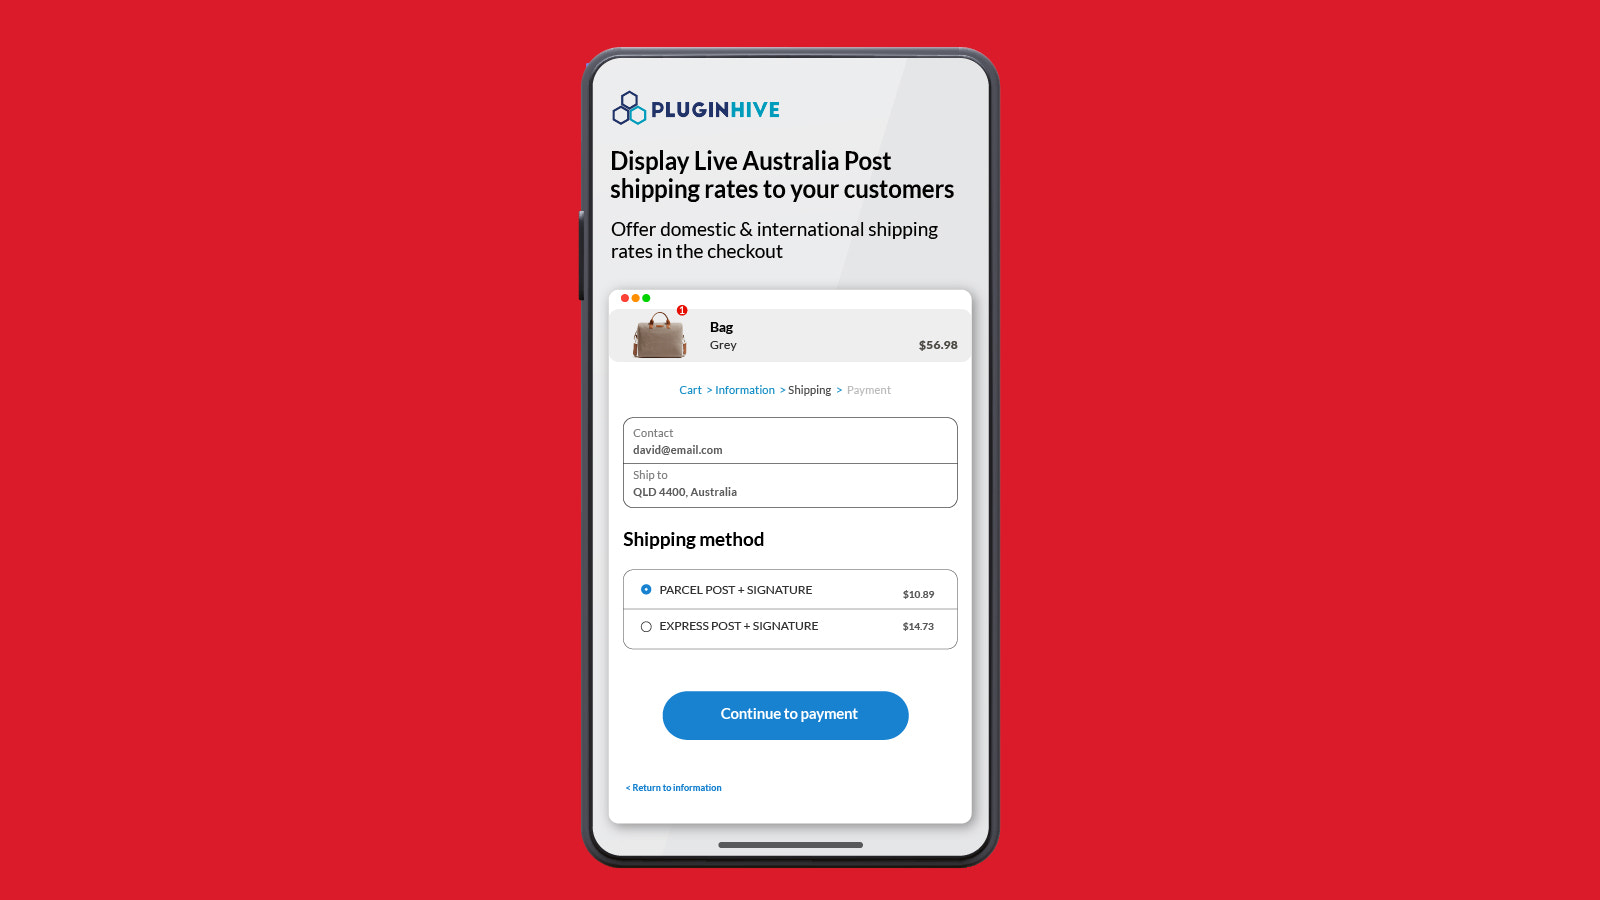 Display Live Australia Post Rates on the Checkout page